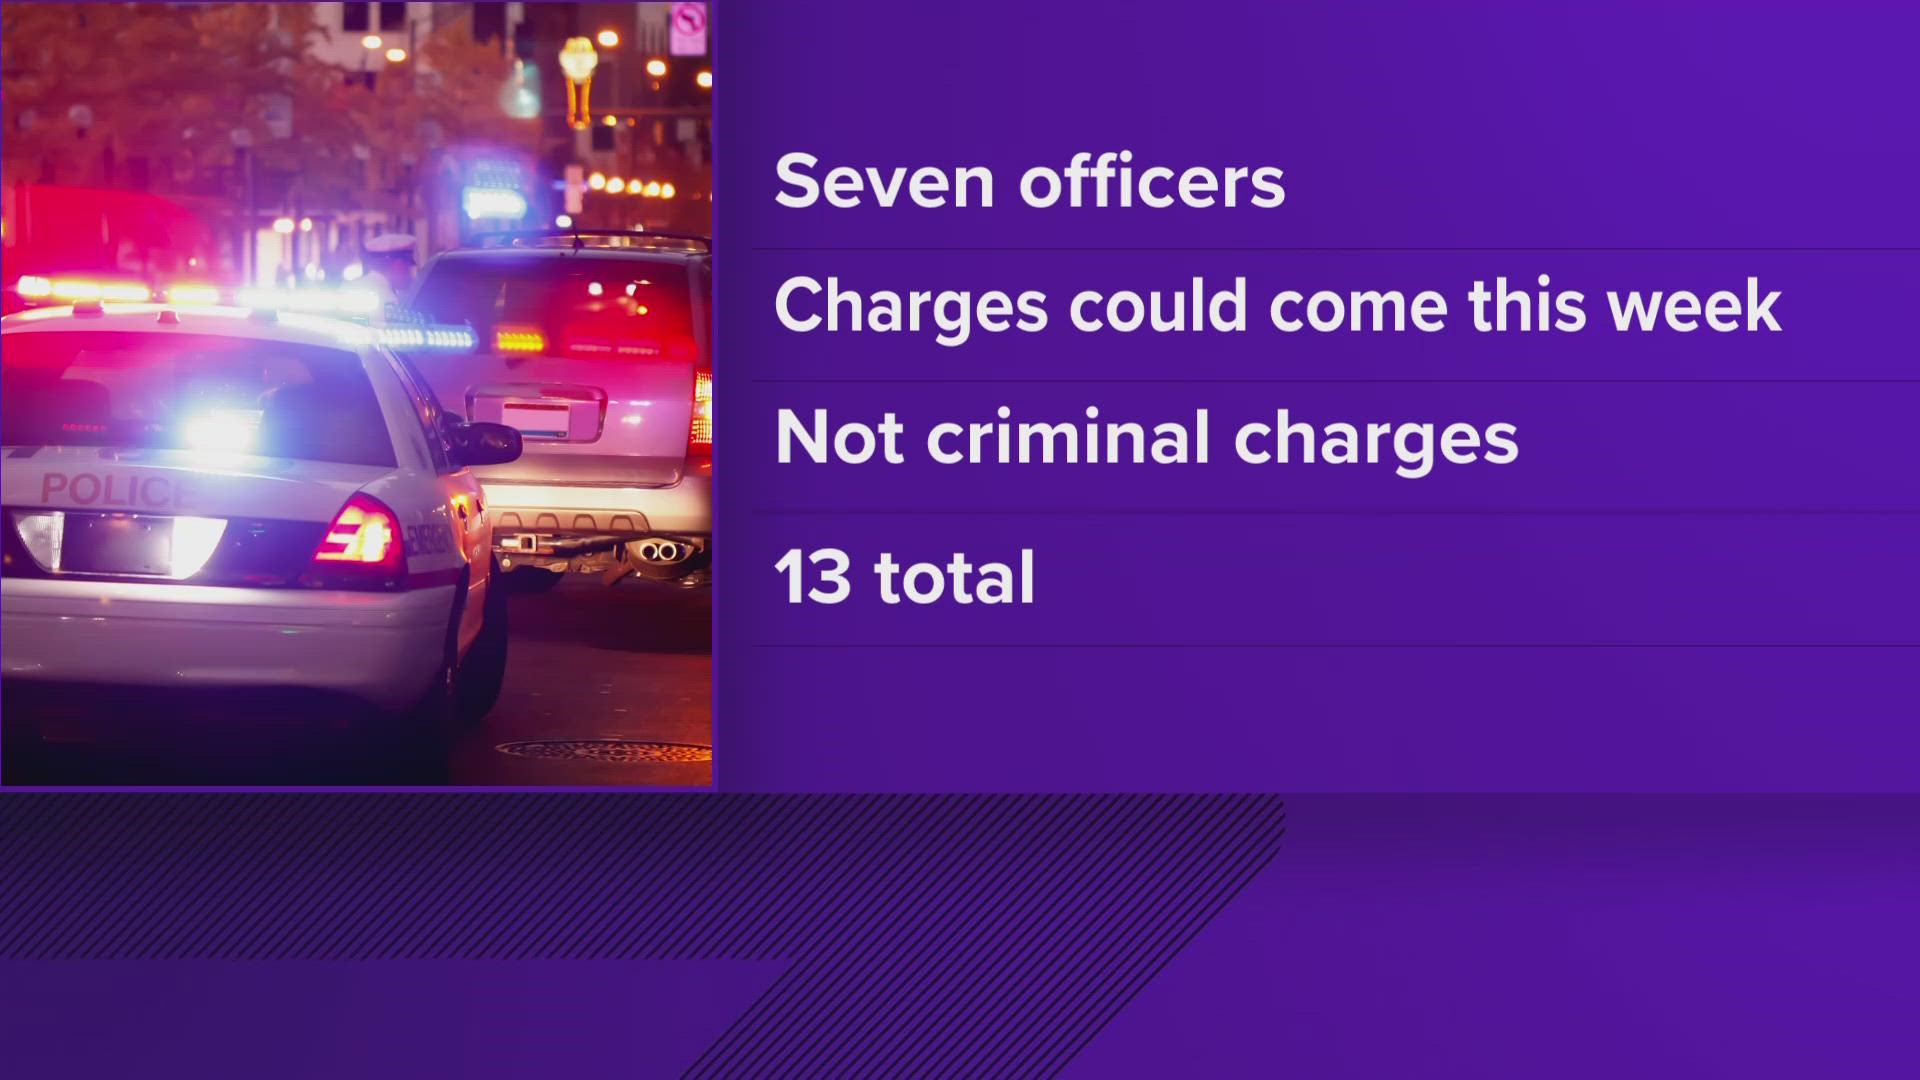 City of Memphis Chief Legal Officer Jennifer Sink told ABC24 a statement of charges for policy violations could come this week for an additional seven officers.